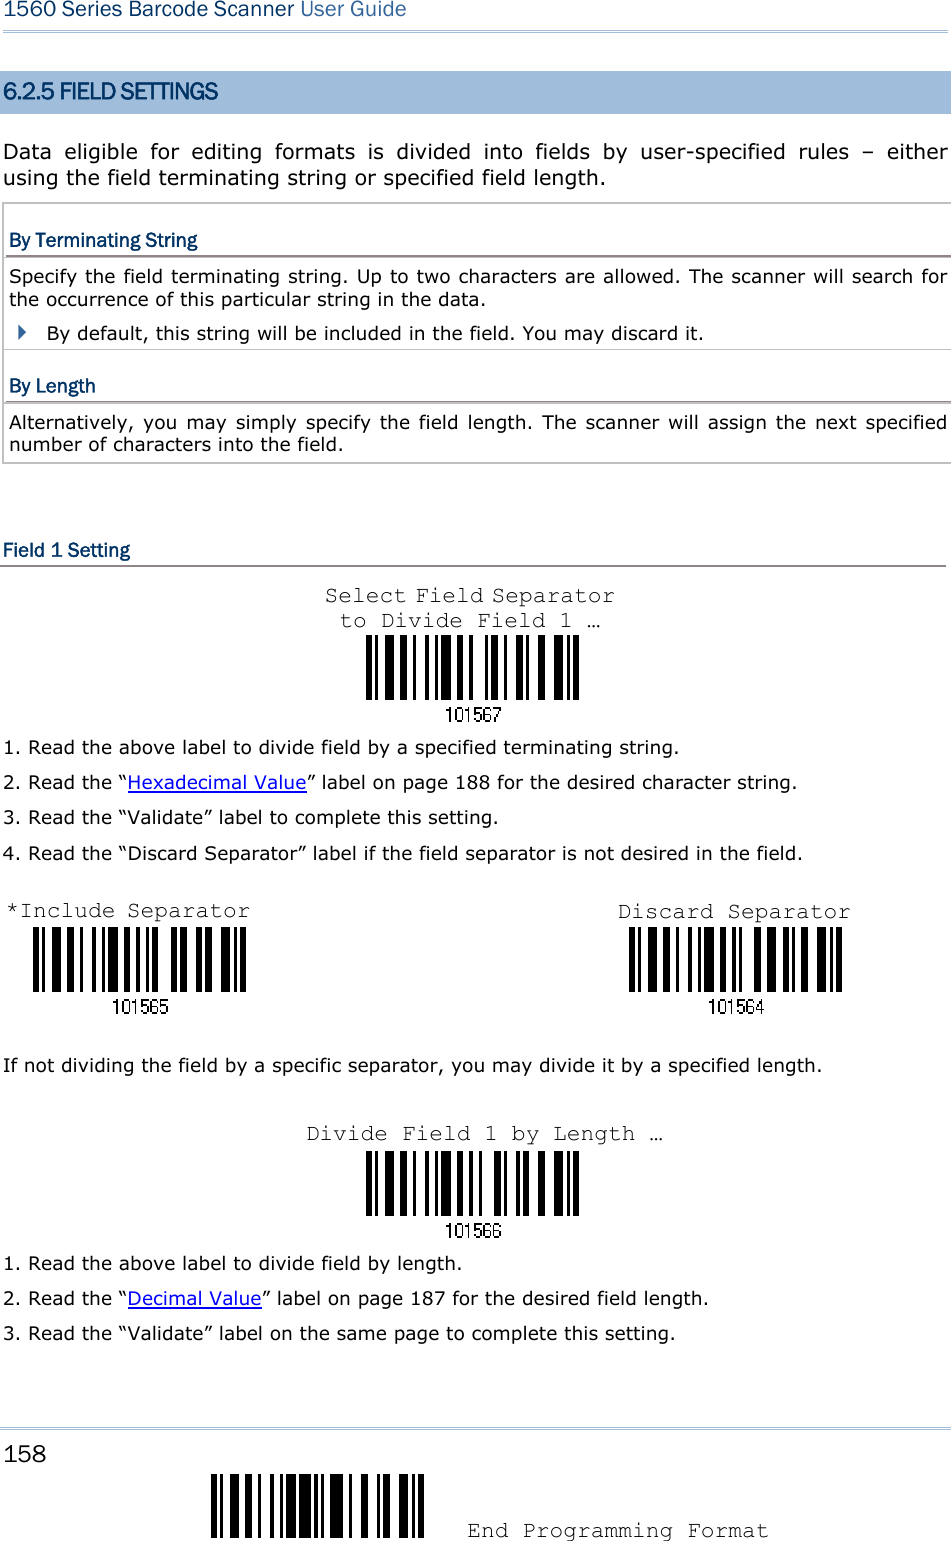 158  End Programming Format 1560 Series Barcode Scanner User Guide  6.2.5 FIELD SETTINGS Data eligible for editing formats is divided into fields by user-specified rules – either using the field terminating string or specified field length. By Terminating String Specify the field terminating string. Up to two characters are allowed. The scanner will search for the occurrence of this particular string in the data.    By default, this string will be included in the field. You may discard it. By Length Alternatively, you may simply specify the field length. The scanner will assign the next specified number of characters into the field.    Field 1 Setting    1. Read the above label to divide field by a specified terminating string. 2. Read the “Hexadecimal Value” label on page 188 for the desired character string.   3. Read the “Validate” label to complete this setting. 4. Read the “Discard Separator” label if the field separator is not desired in the field.                                 If not dividing the field by a specific separator, you may divide it by a specified length.    1. Read the above label to divide field by length. 2. Read the “Decimal Value” label on page 187 for the desired field length. 3. Read the “Validate” label on the same page to complete this setting. Select Field Separator to Divide Field 1 … *Include Separator Discard Separator Divide Field 1 by Length …